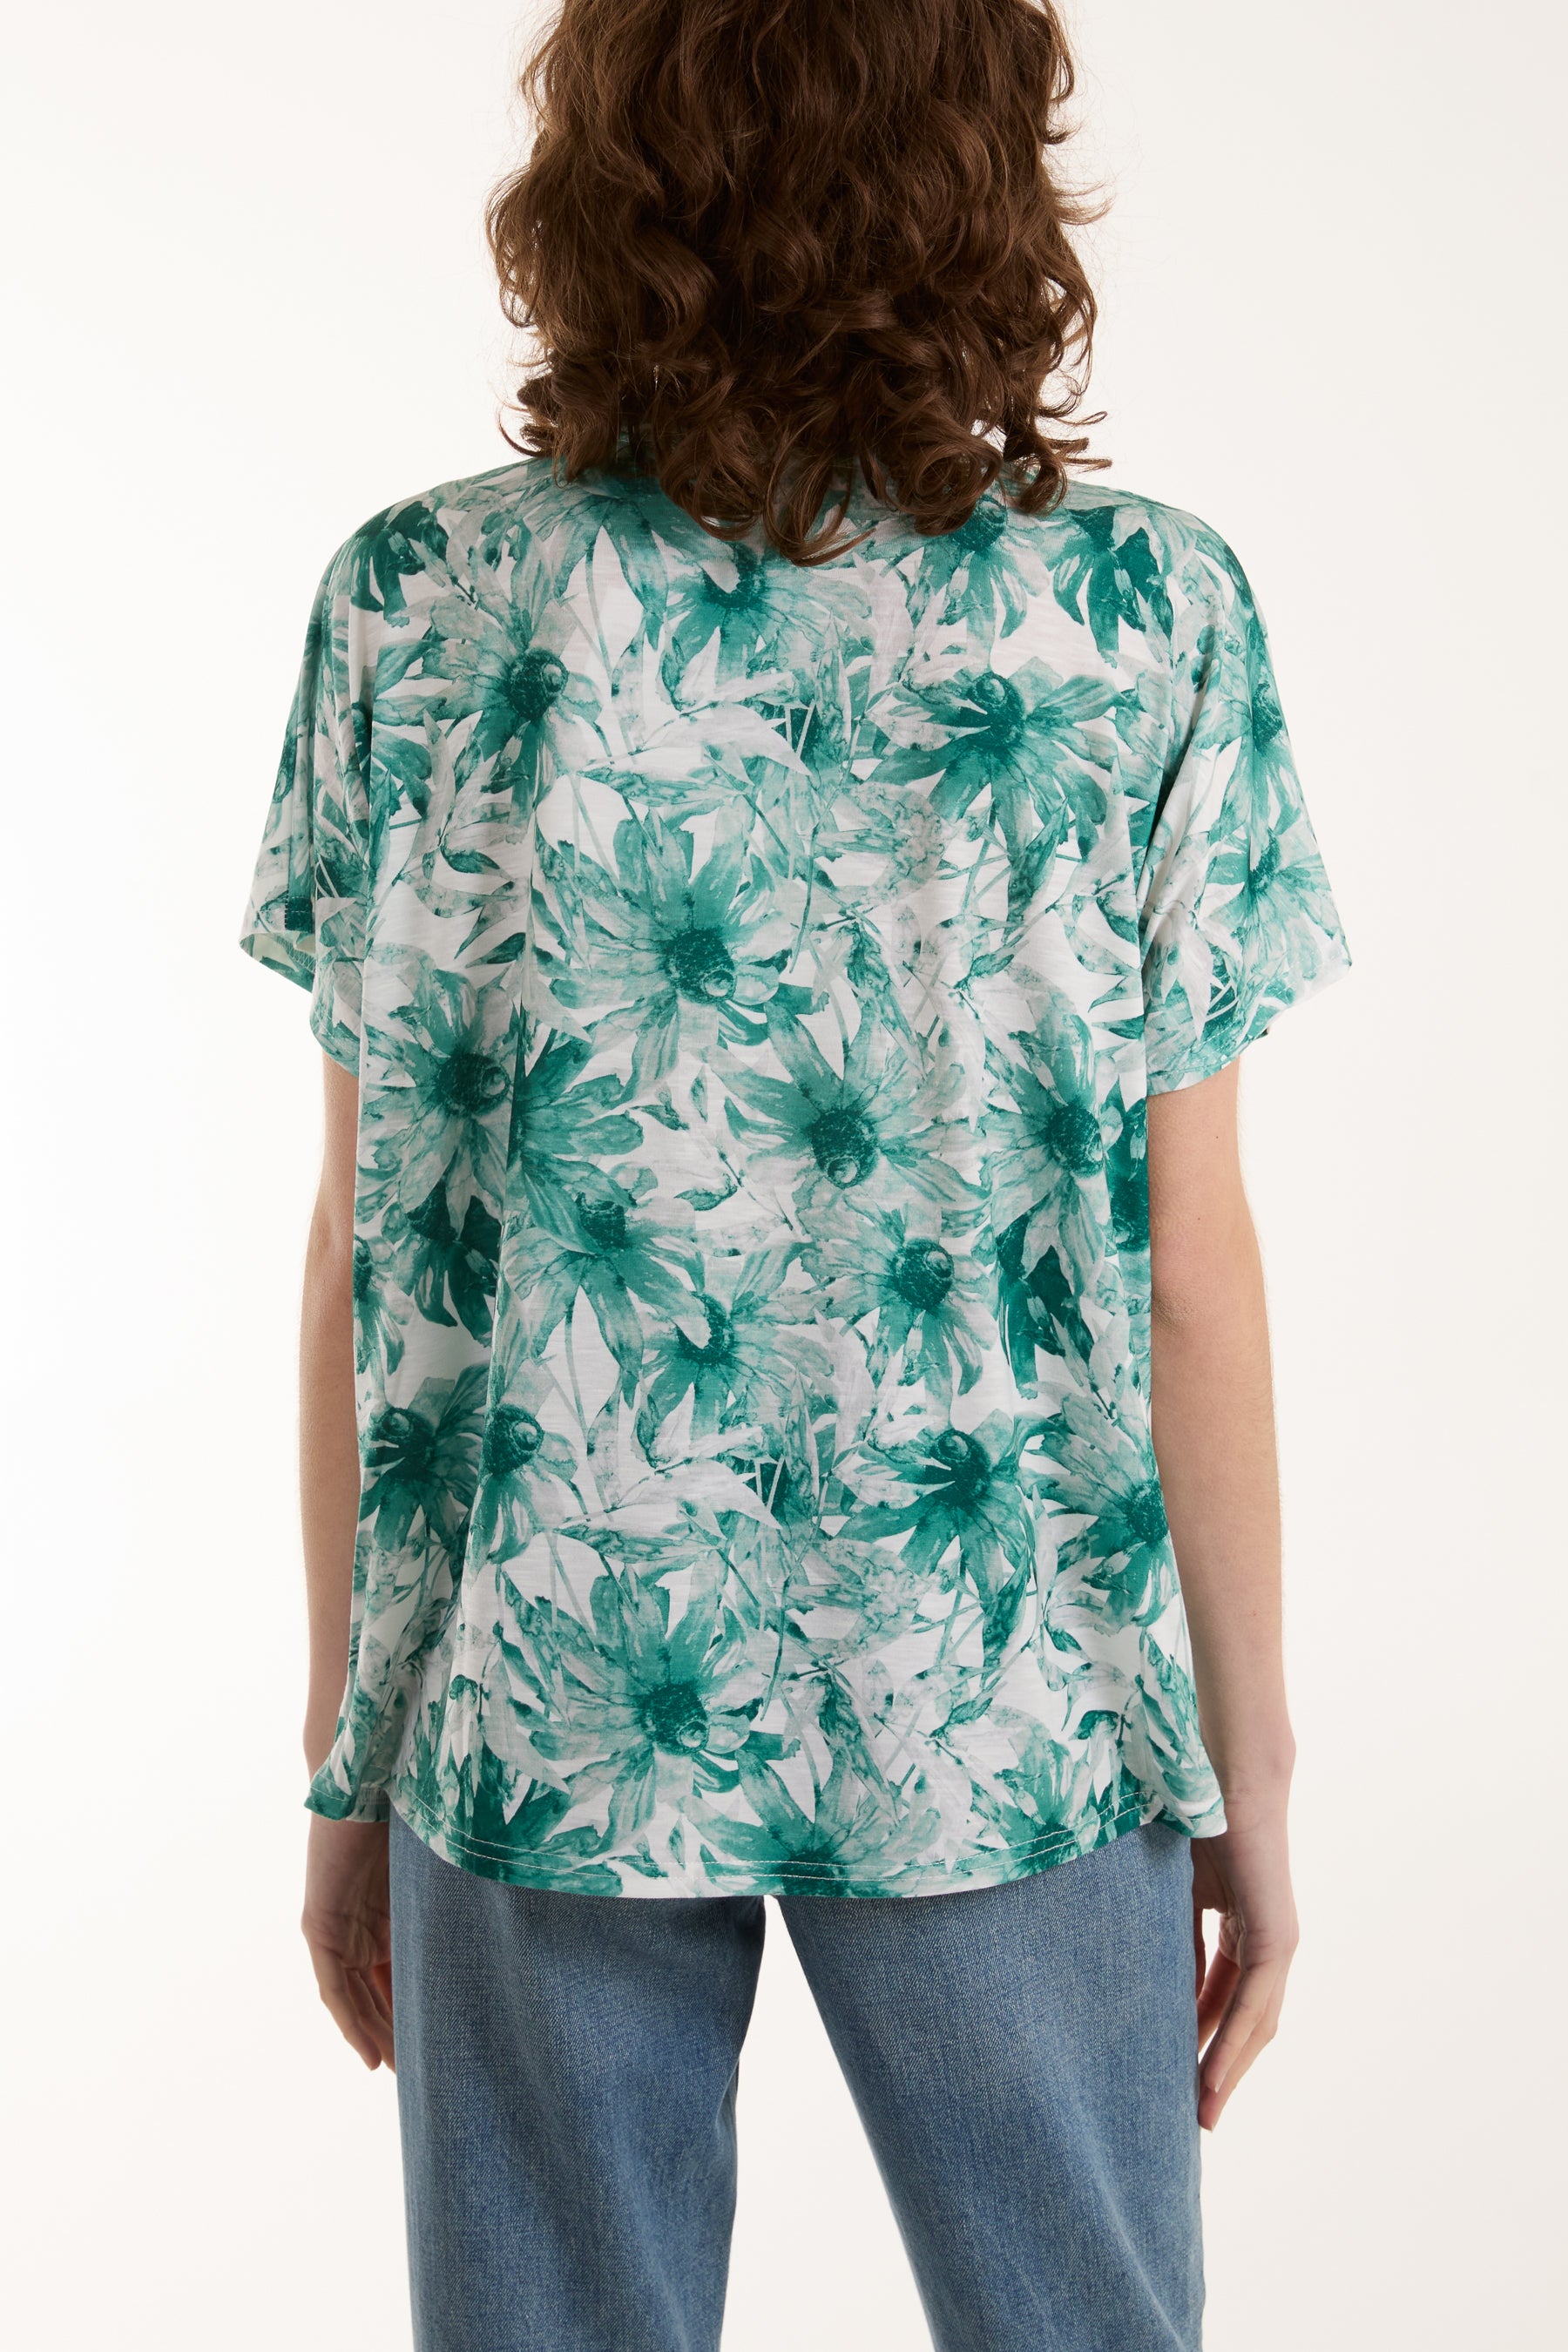 Abstract Floral Print Tee